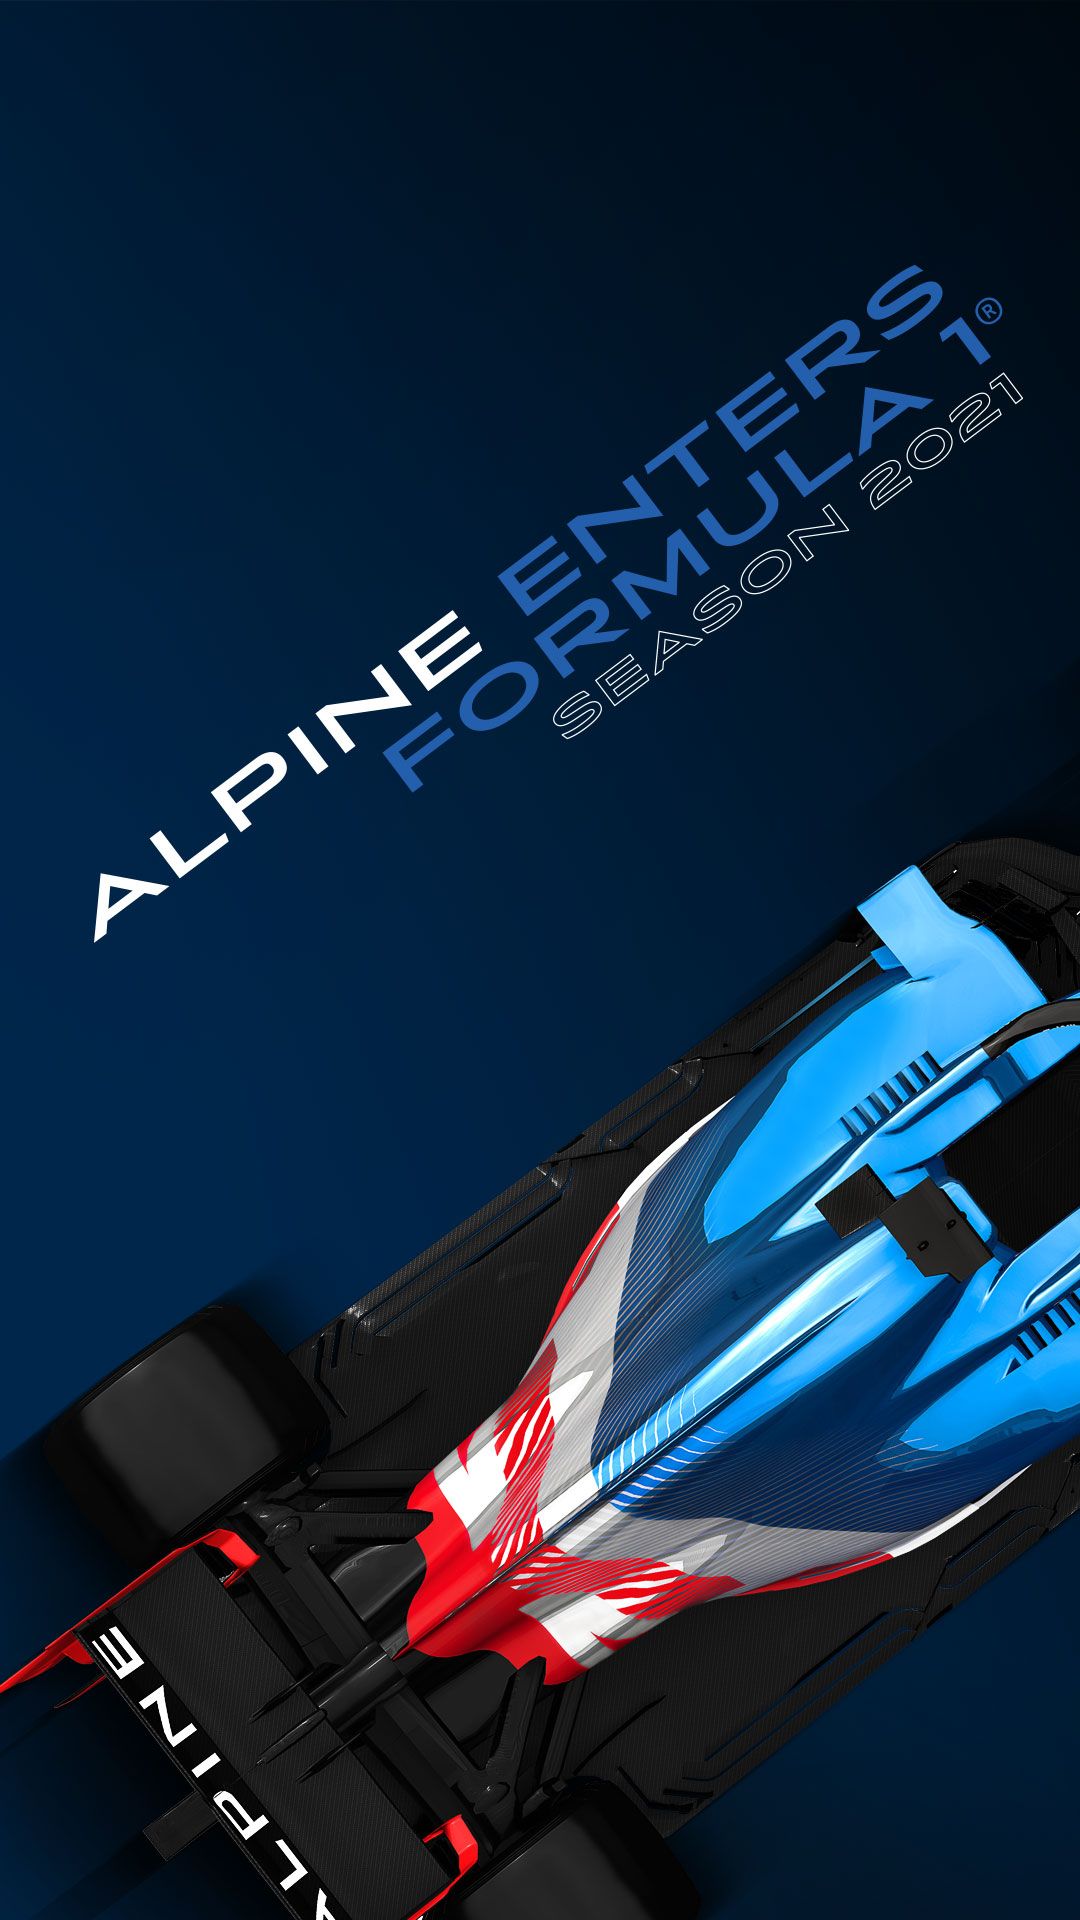 Alpine A521 Wallpapers